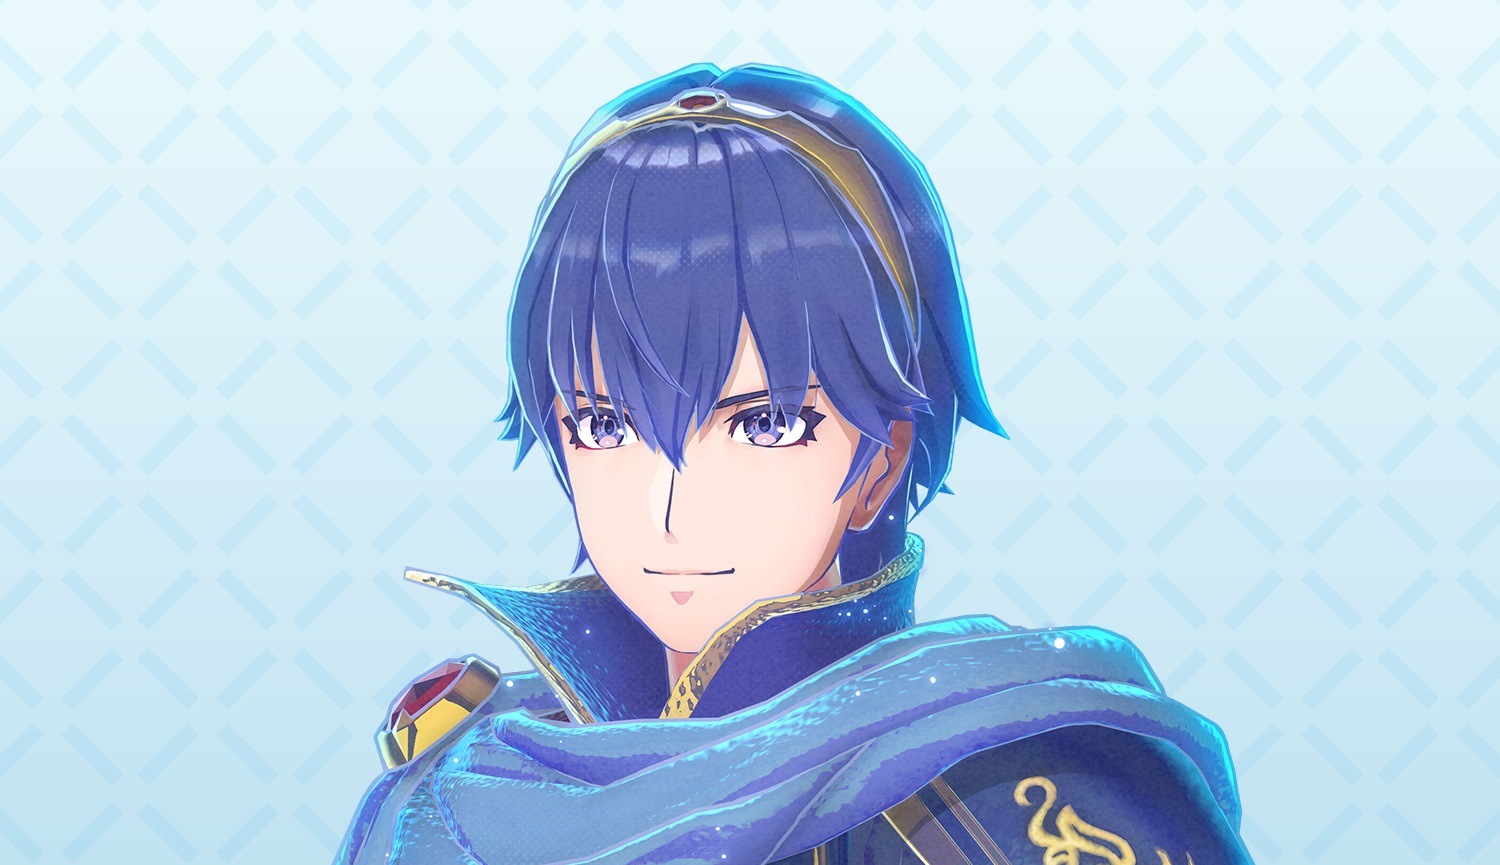 Fire Emblem Engage introduces Marth